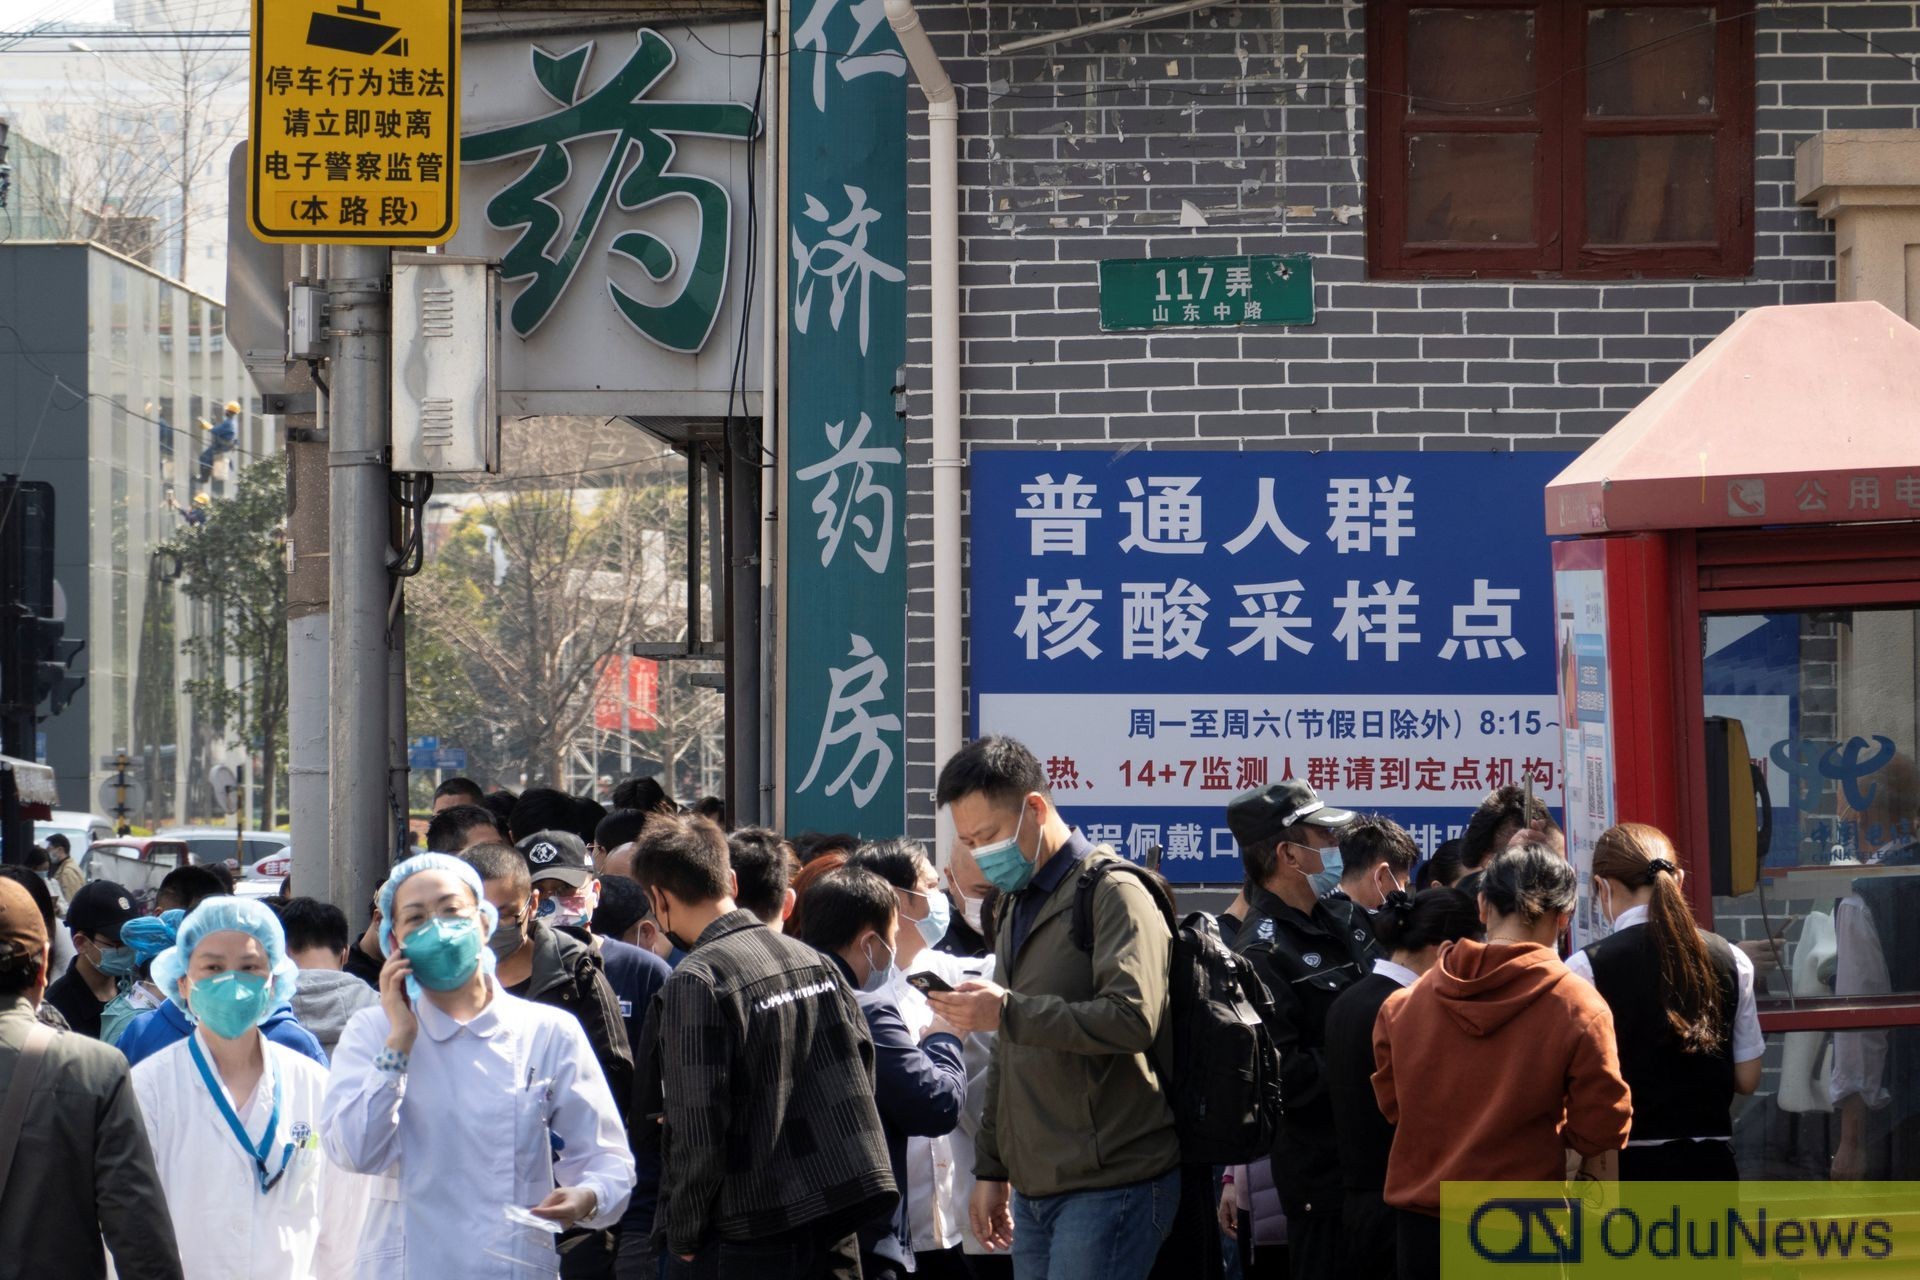 COVID-19: Beijing Tests Millions; Puts Thousands in Lockdown After 'Ferocious' Outbreak at 24-Hour Bar  